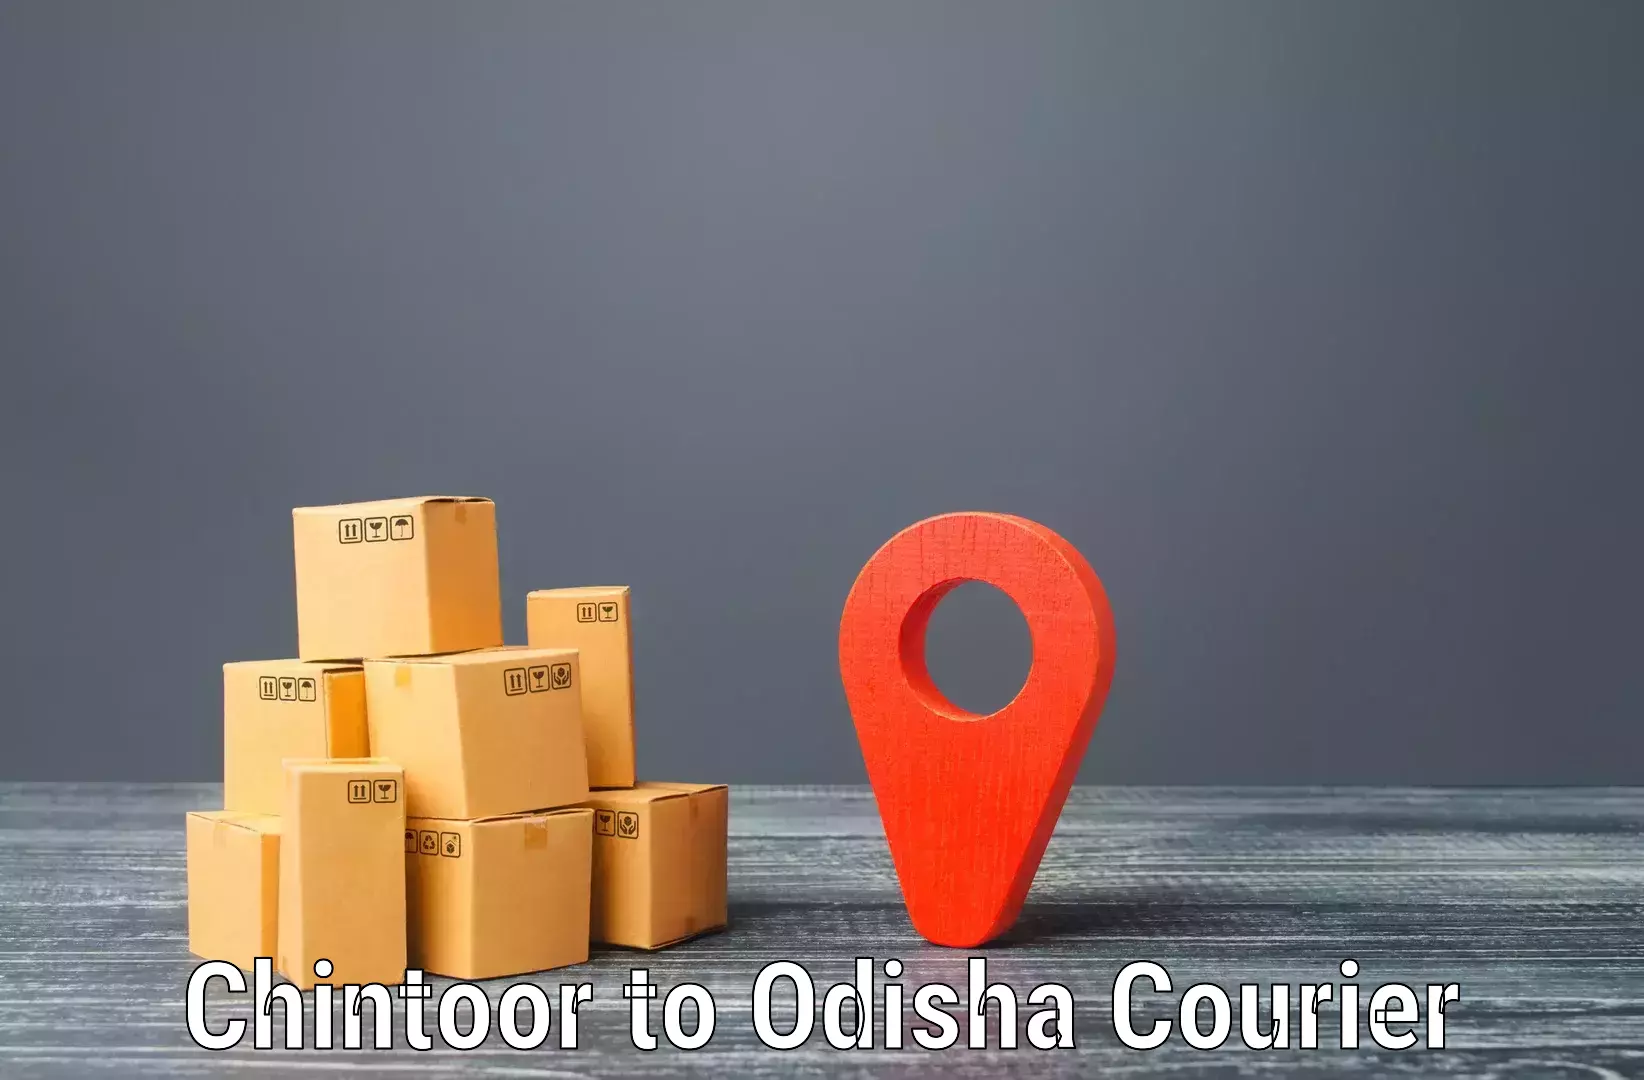 Reliable package handling Chintoor to Bhuban